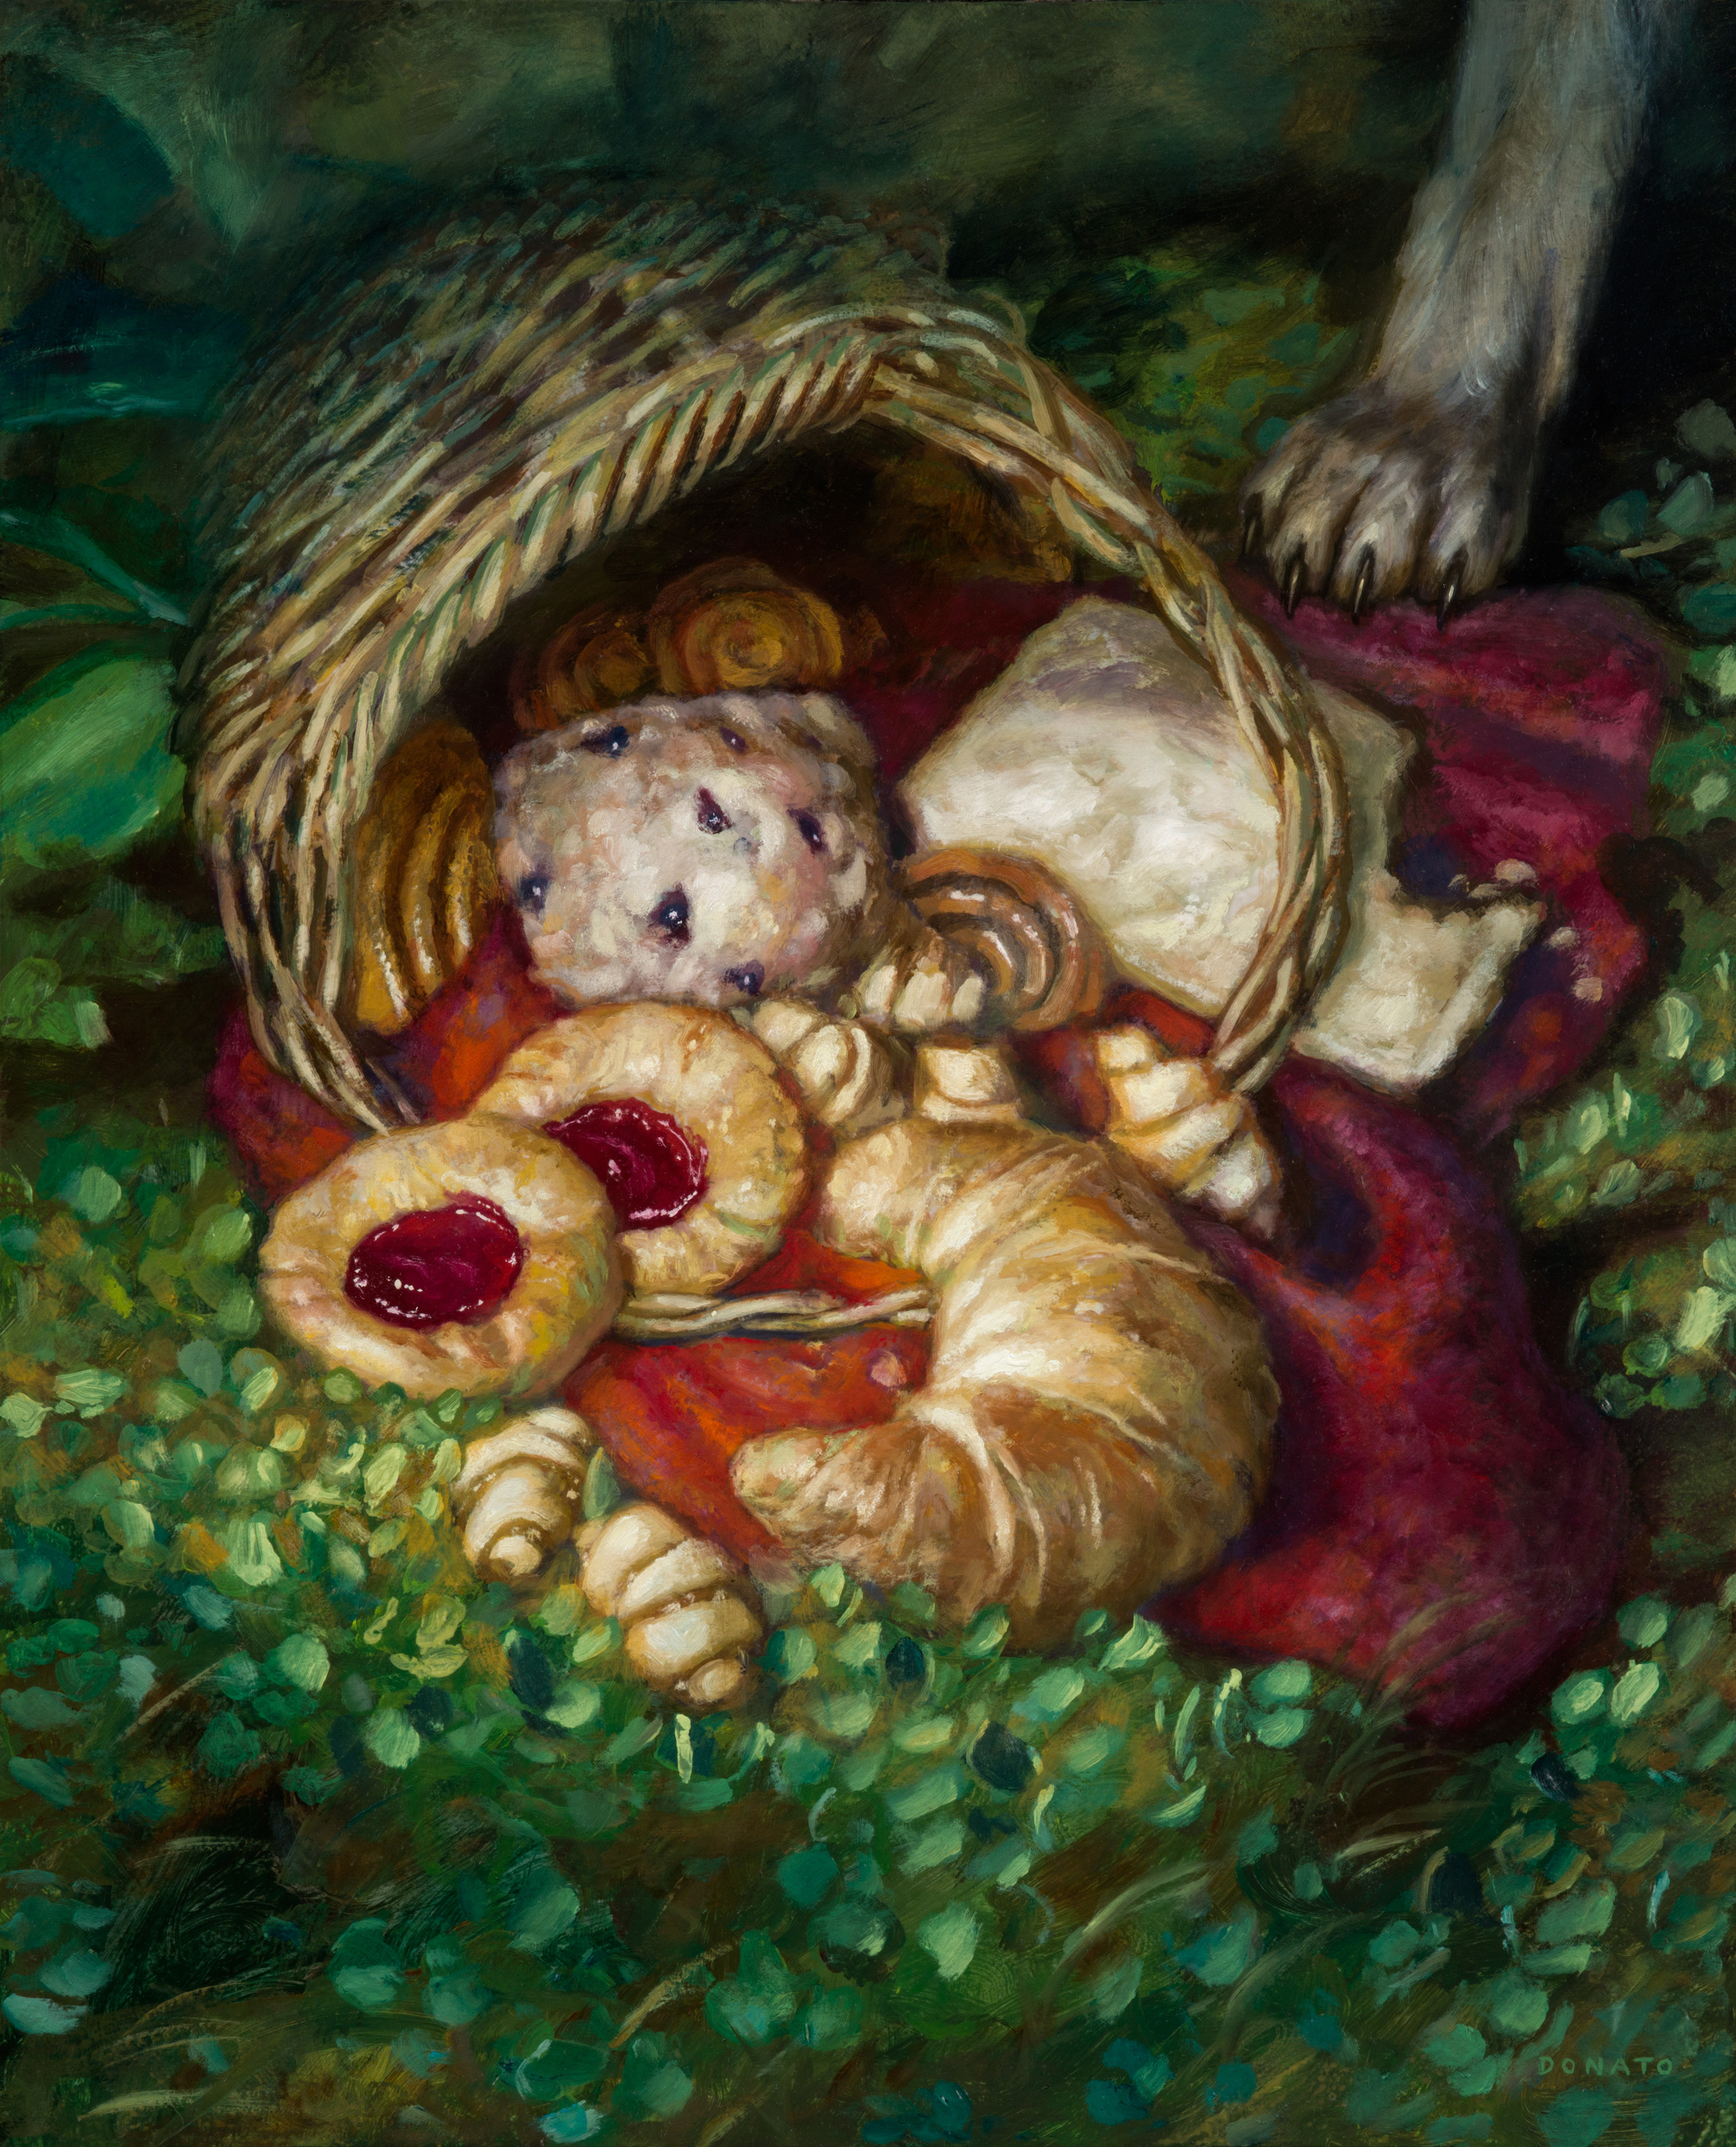 Food Token - Little Red Riding Hood
Throne of Eldraine 2019
20" x 16"  Oil on Panel
private collection